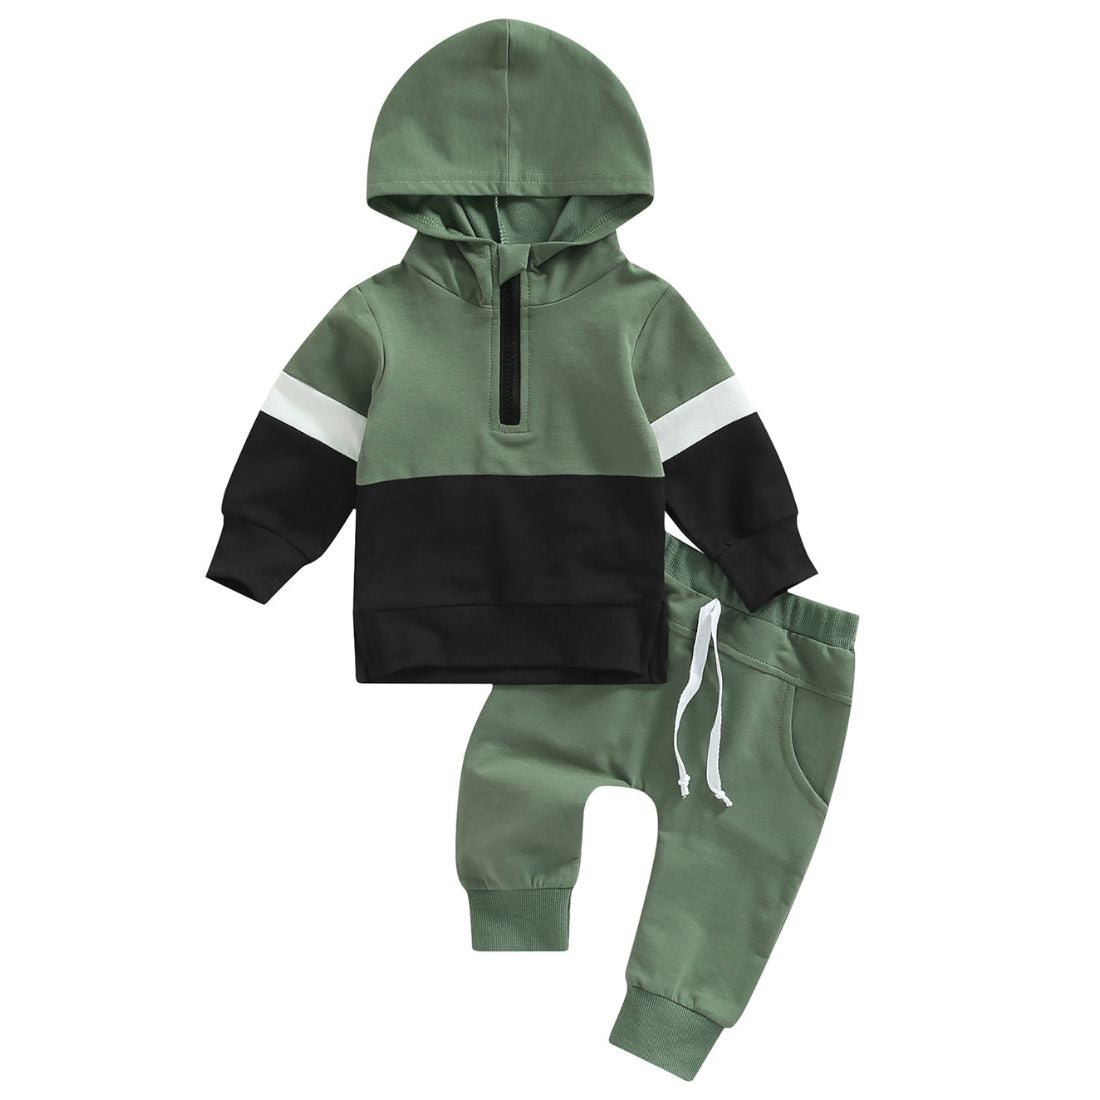 Unisex Hooded Colour Block 2 Piece Clothing Set - My Trendy Youngsters | Buy on-trend and stylish Baby and Toddler Clothing Sets @ My Trendy Youngsters - Dress your little one in Style @ My Trendy Youngsters 